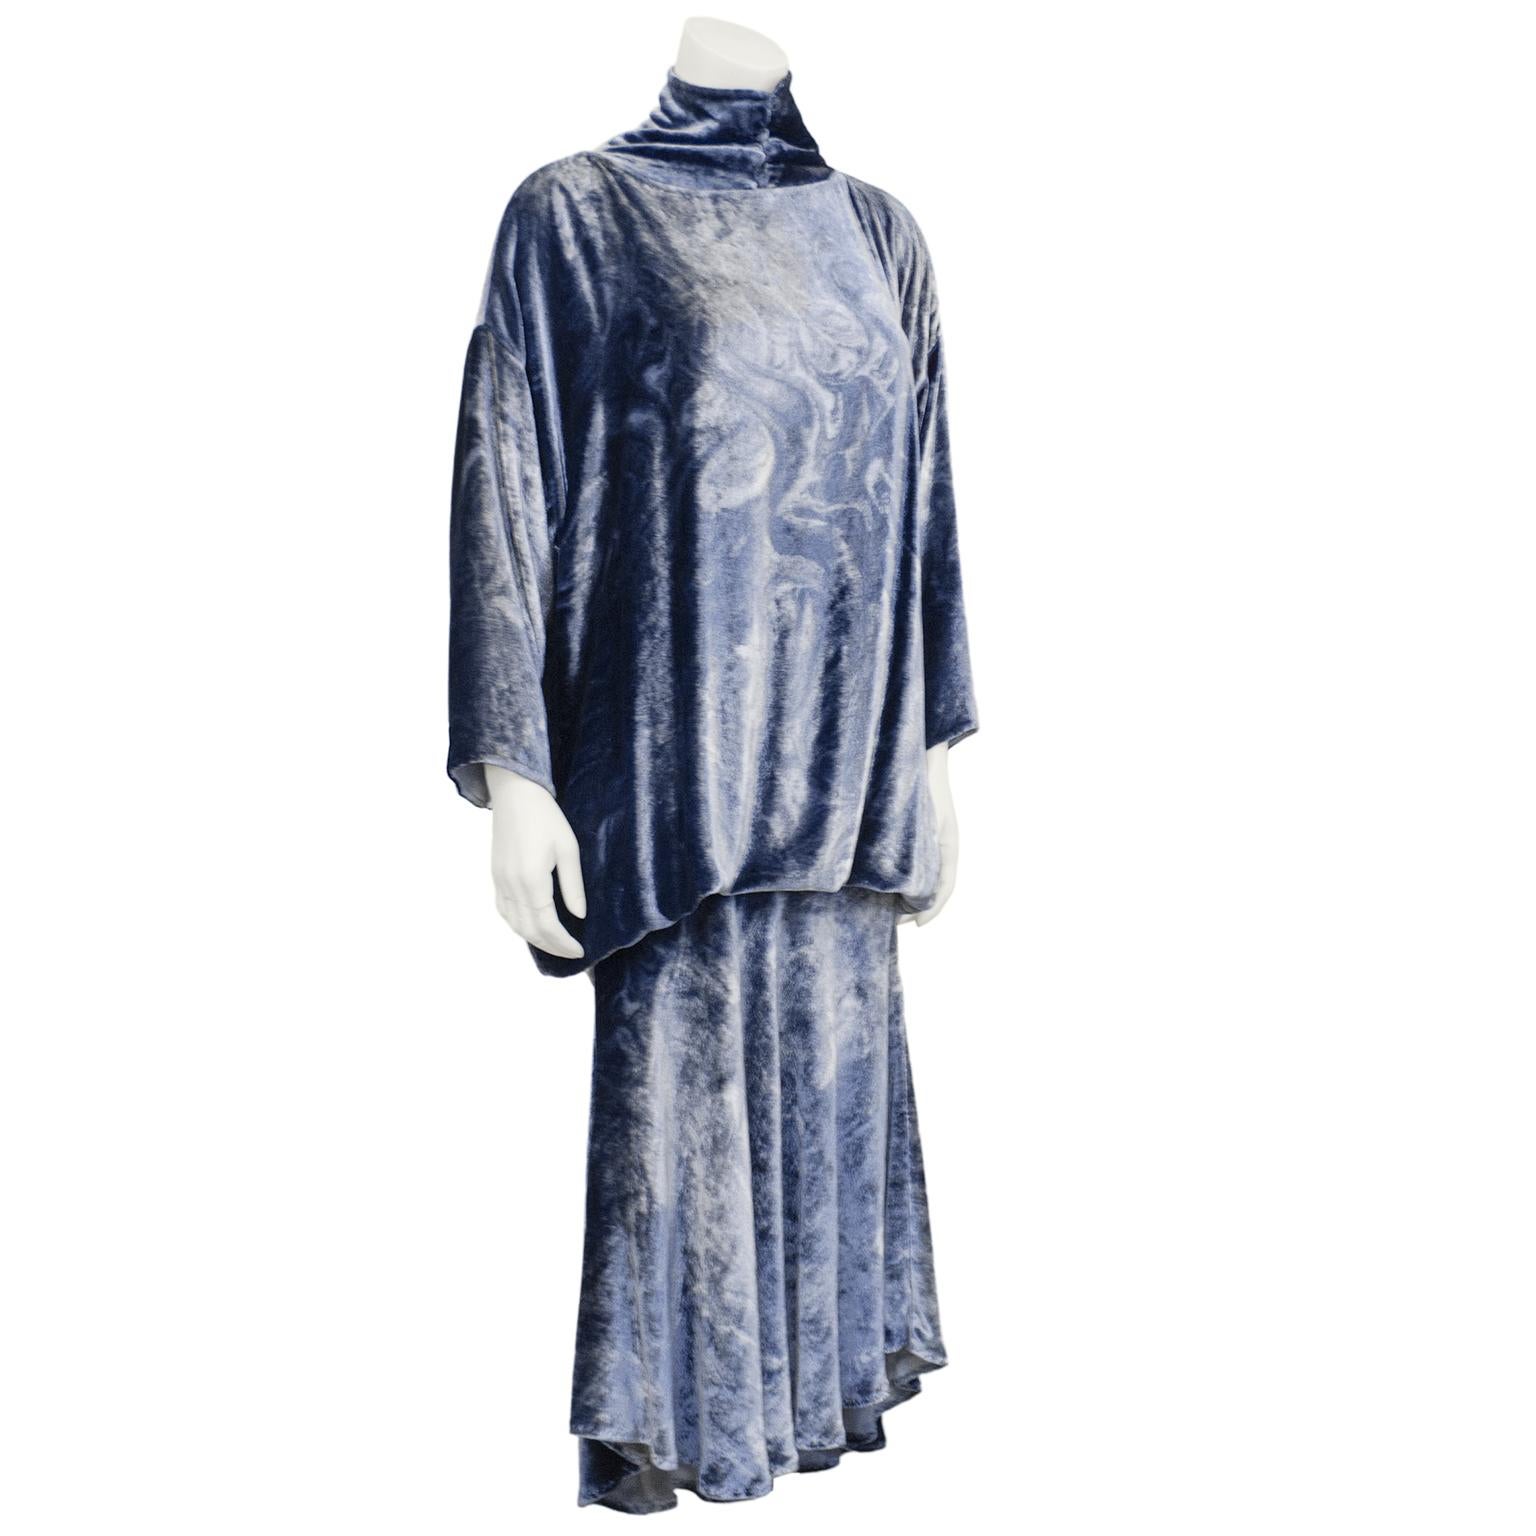 1980s Patricia Lester ensemble. Blue panné velvet  pressed to create a white swirl throughout. Top features a cowl neck with buttons, drop shoulders, Dolman sleeves and a blouson hem. Skirt sits at the waist with an asymmetrical hem. Excellent